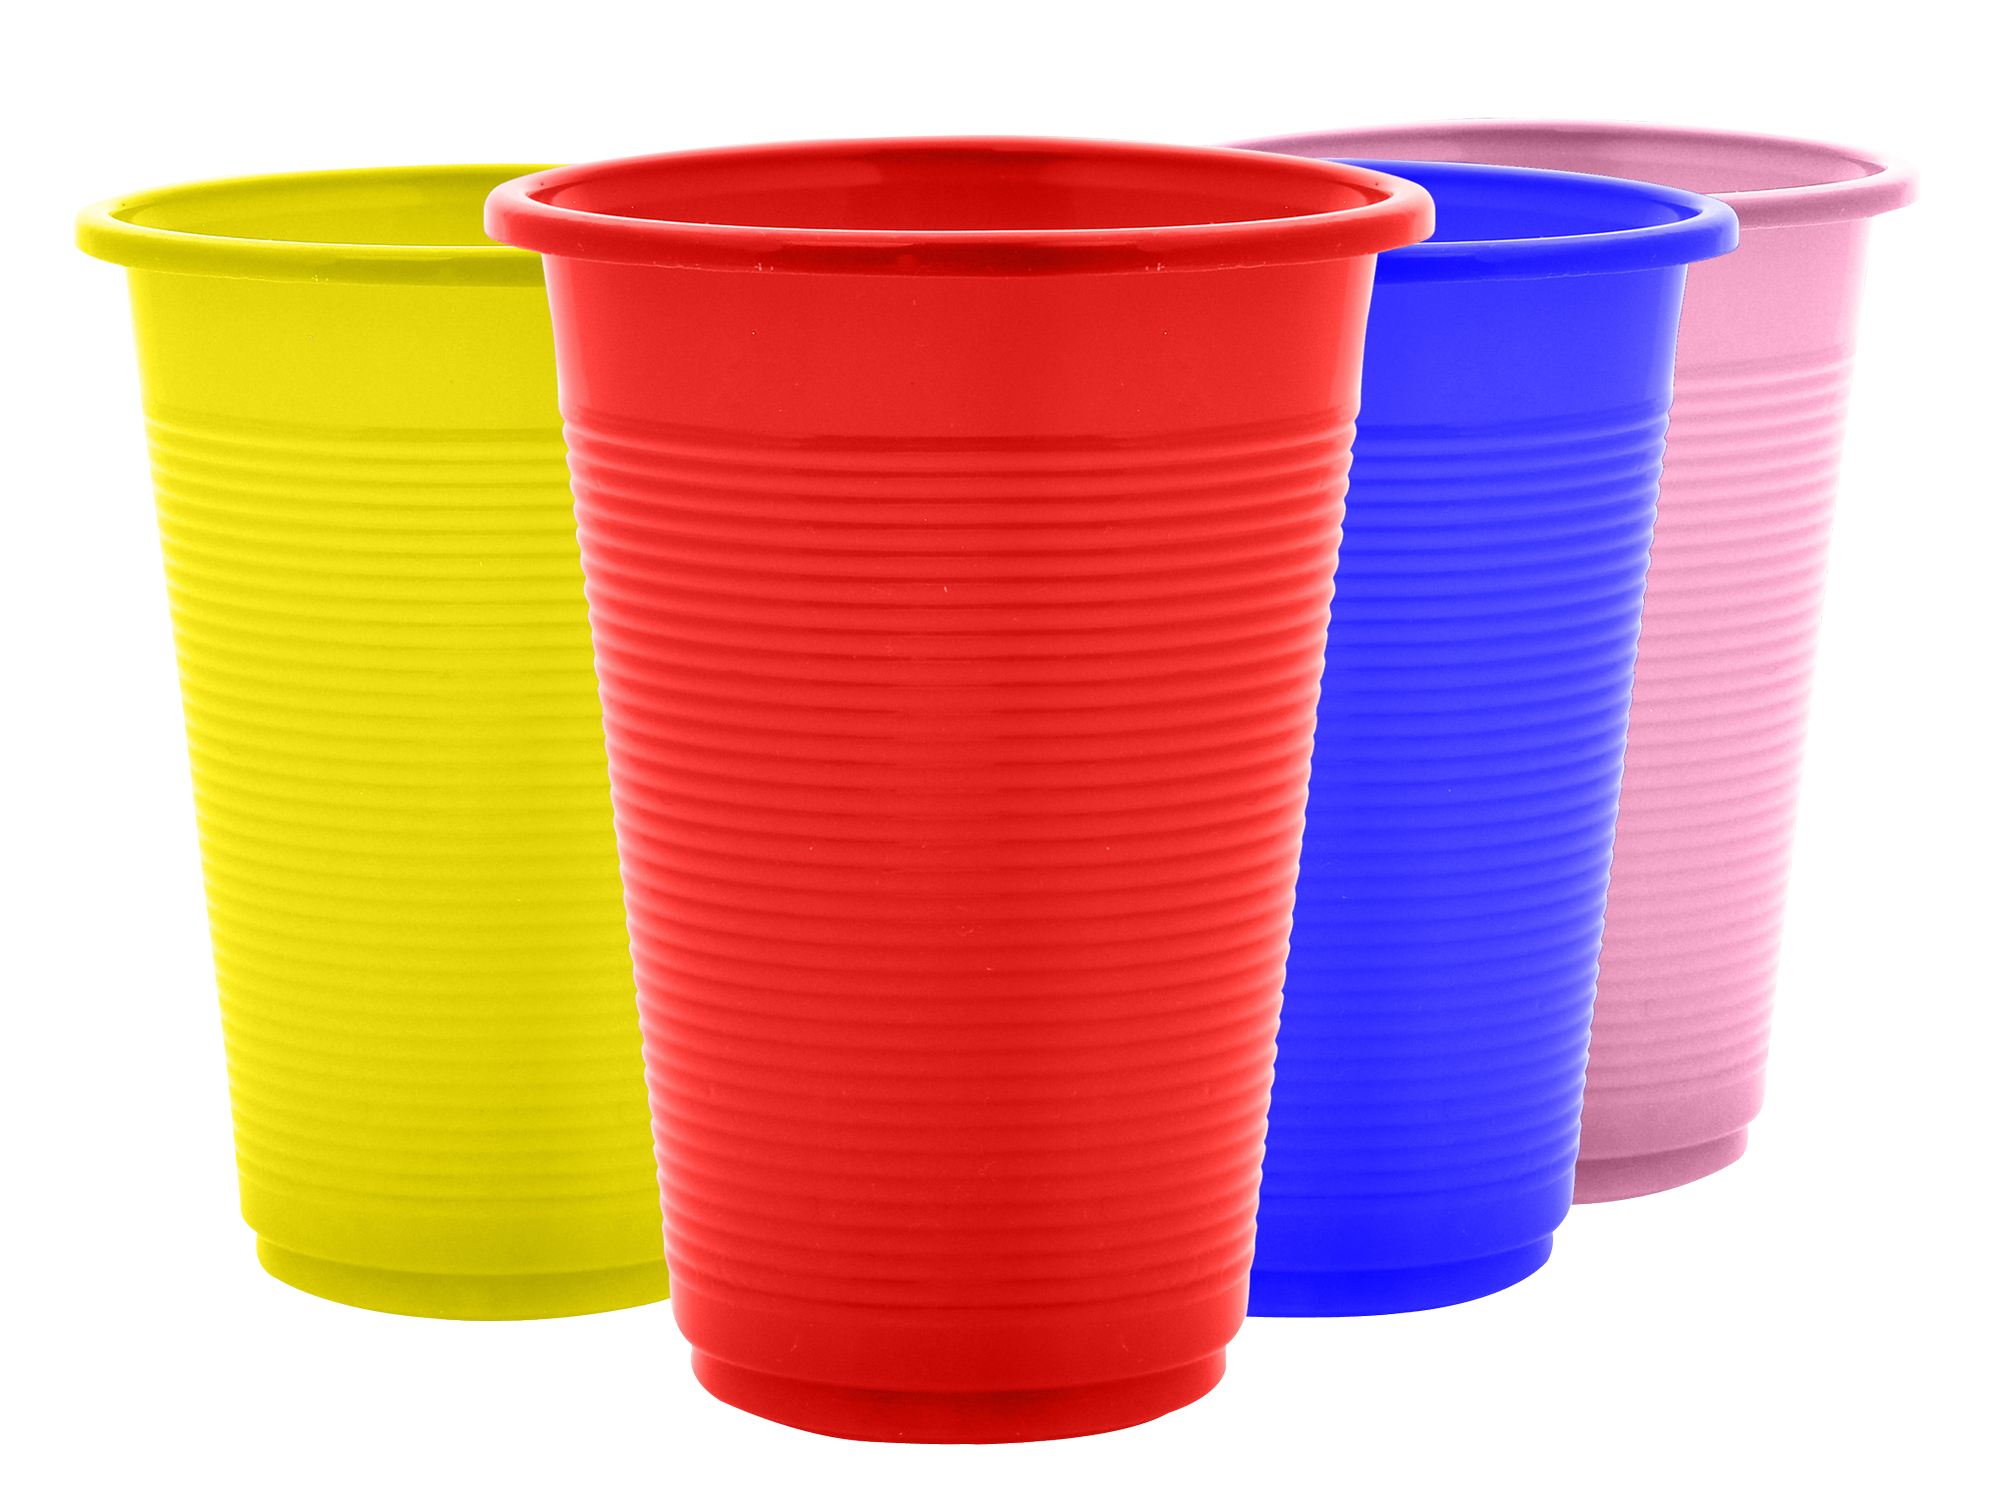 Plastic Cups PNG Image.